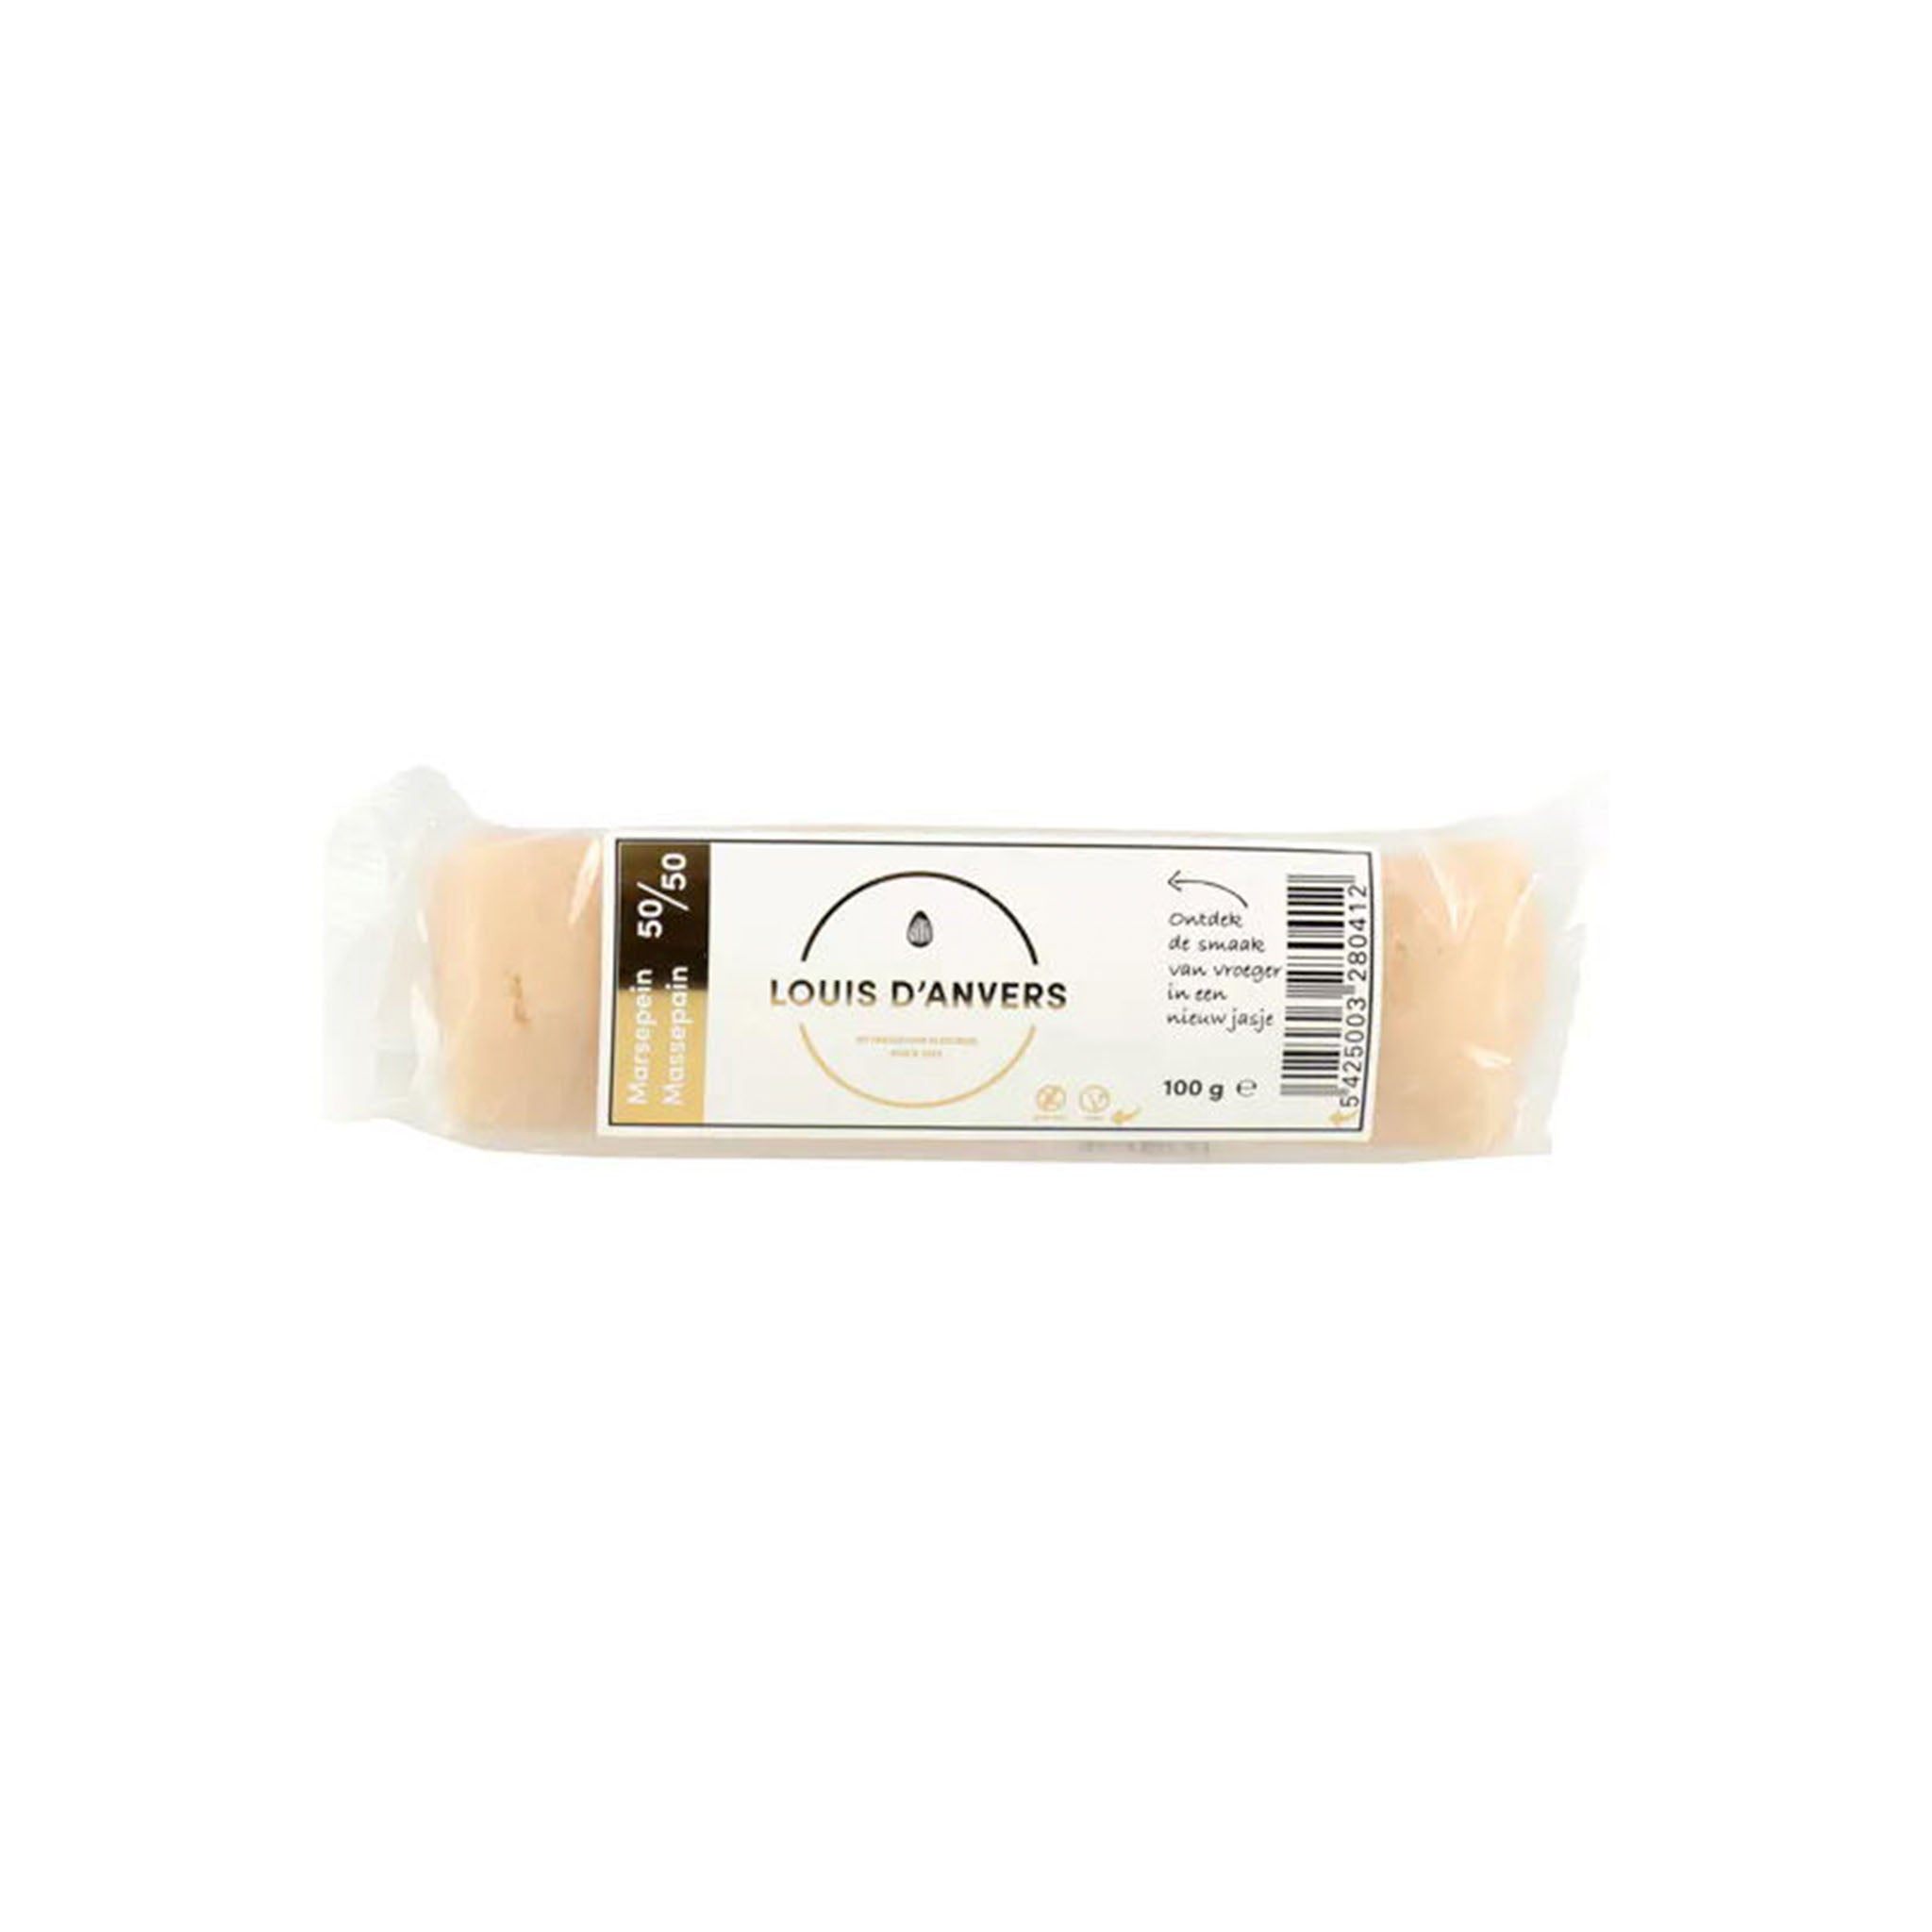 LOUIS D'ANVERS PURE MARZIPAN 100g